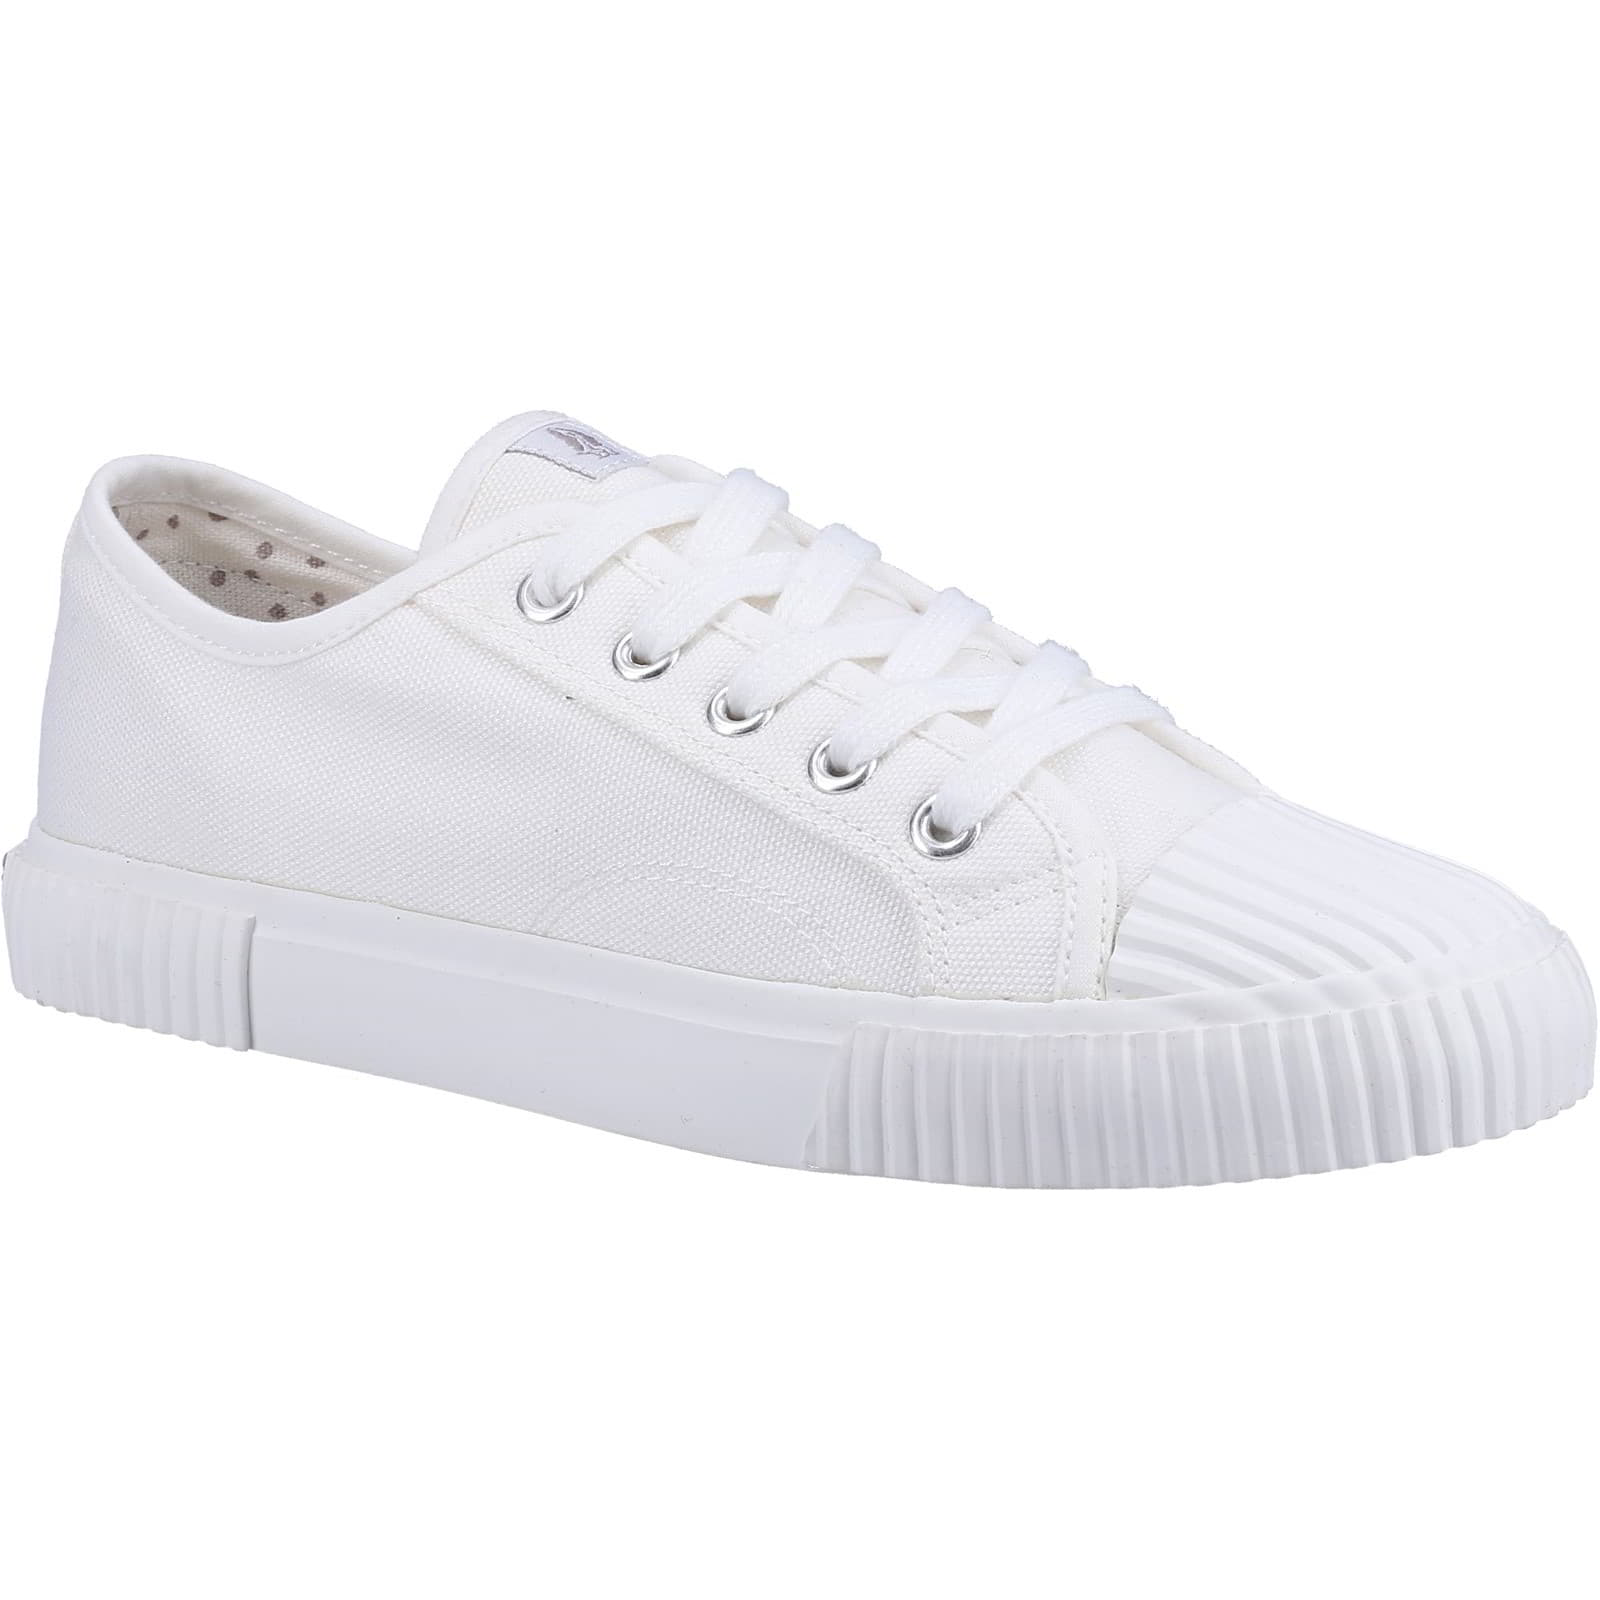 Hush Puppies Women's Brooke Lace Up Canvas Shoes Trainers - UK 6